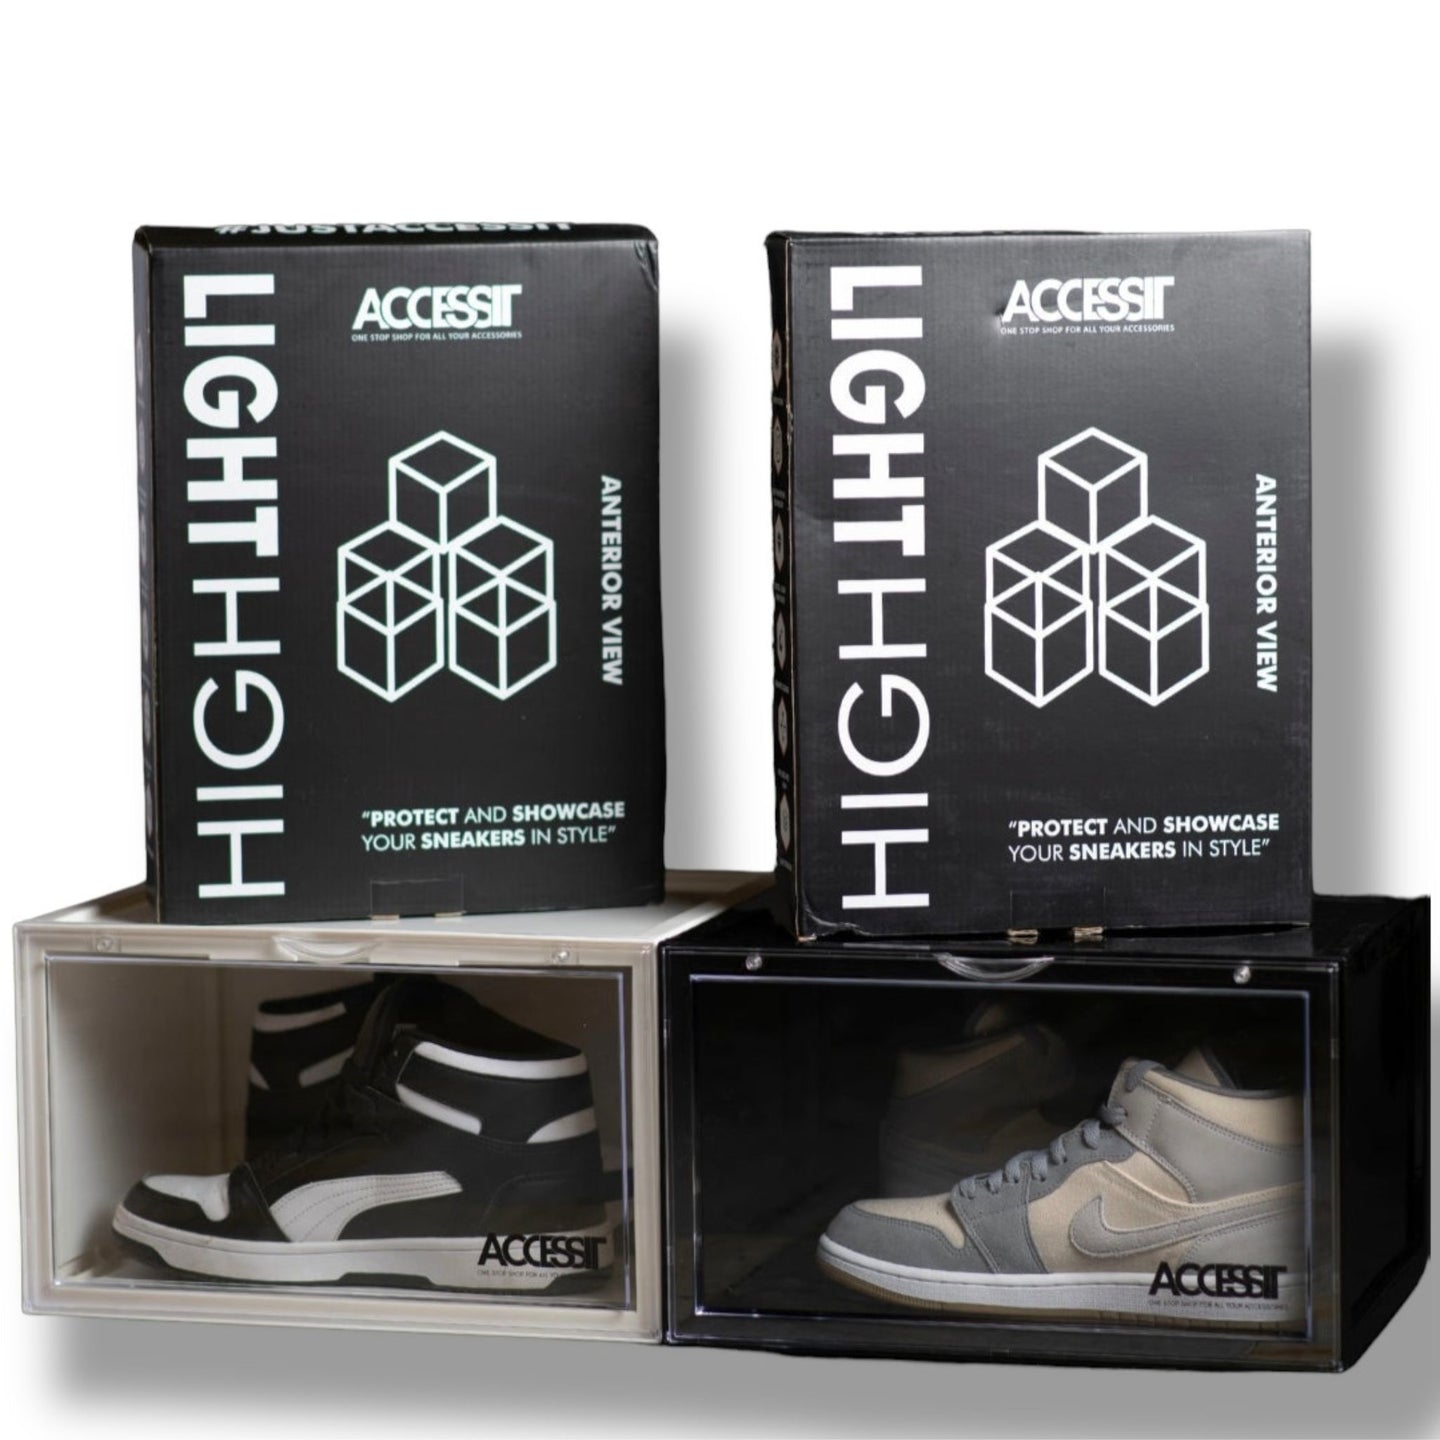 Highlight Sneaker Crates | Shoe Storage Crates